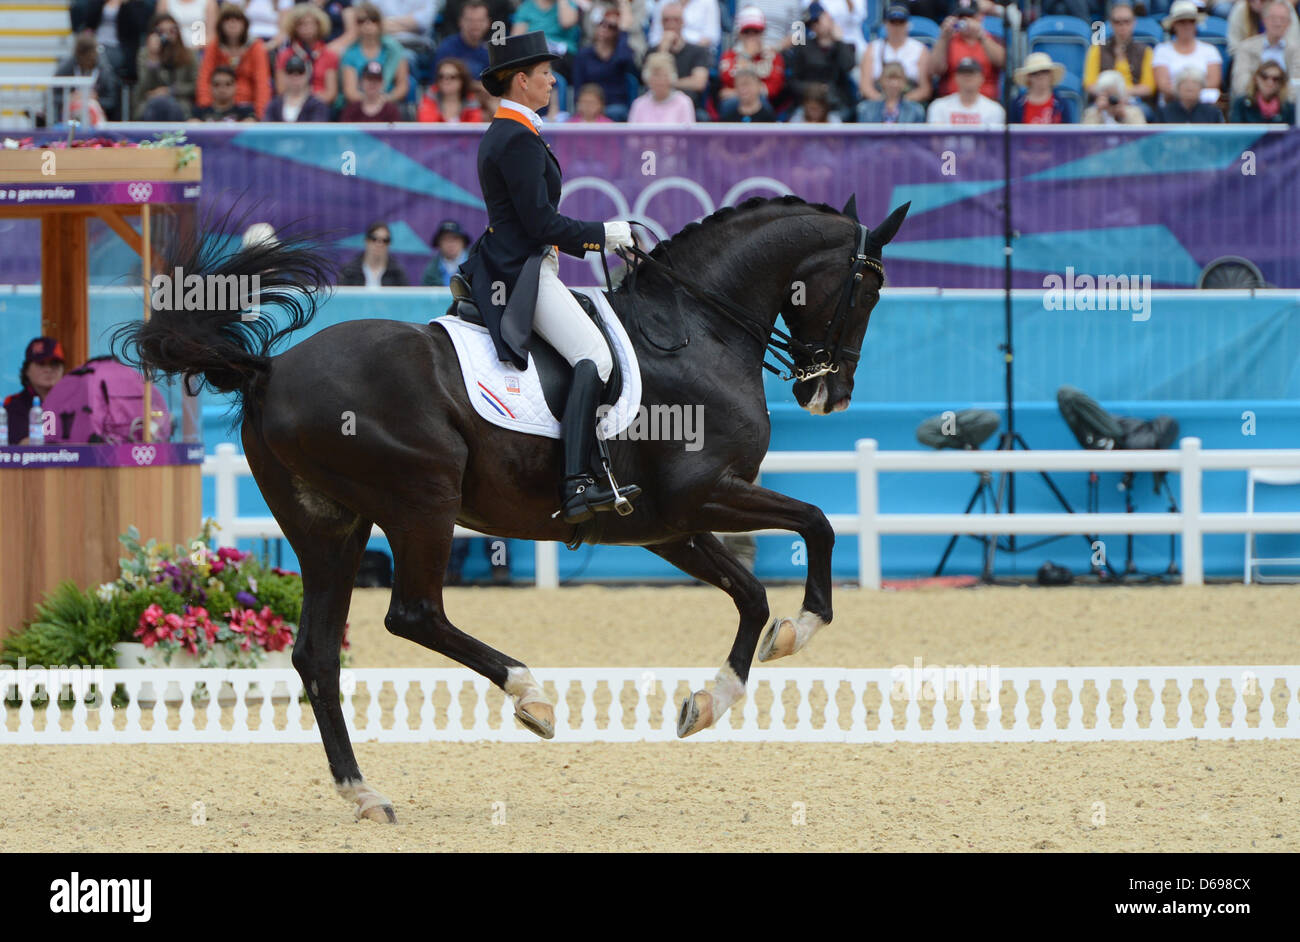 Dutch dressage rider Anky van Grunsven performs with her horse Salinero in  the olympic dressage competition